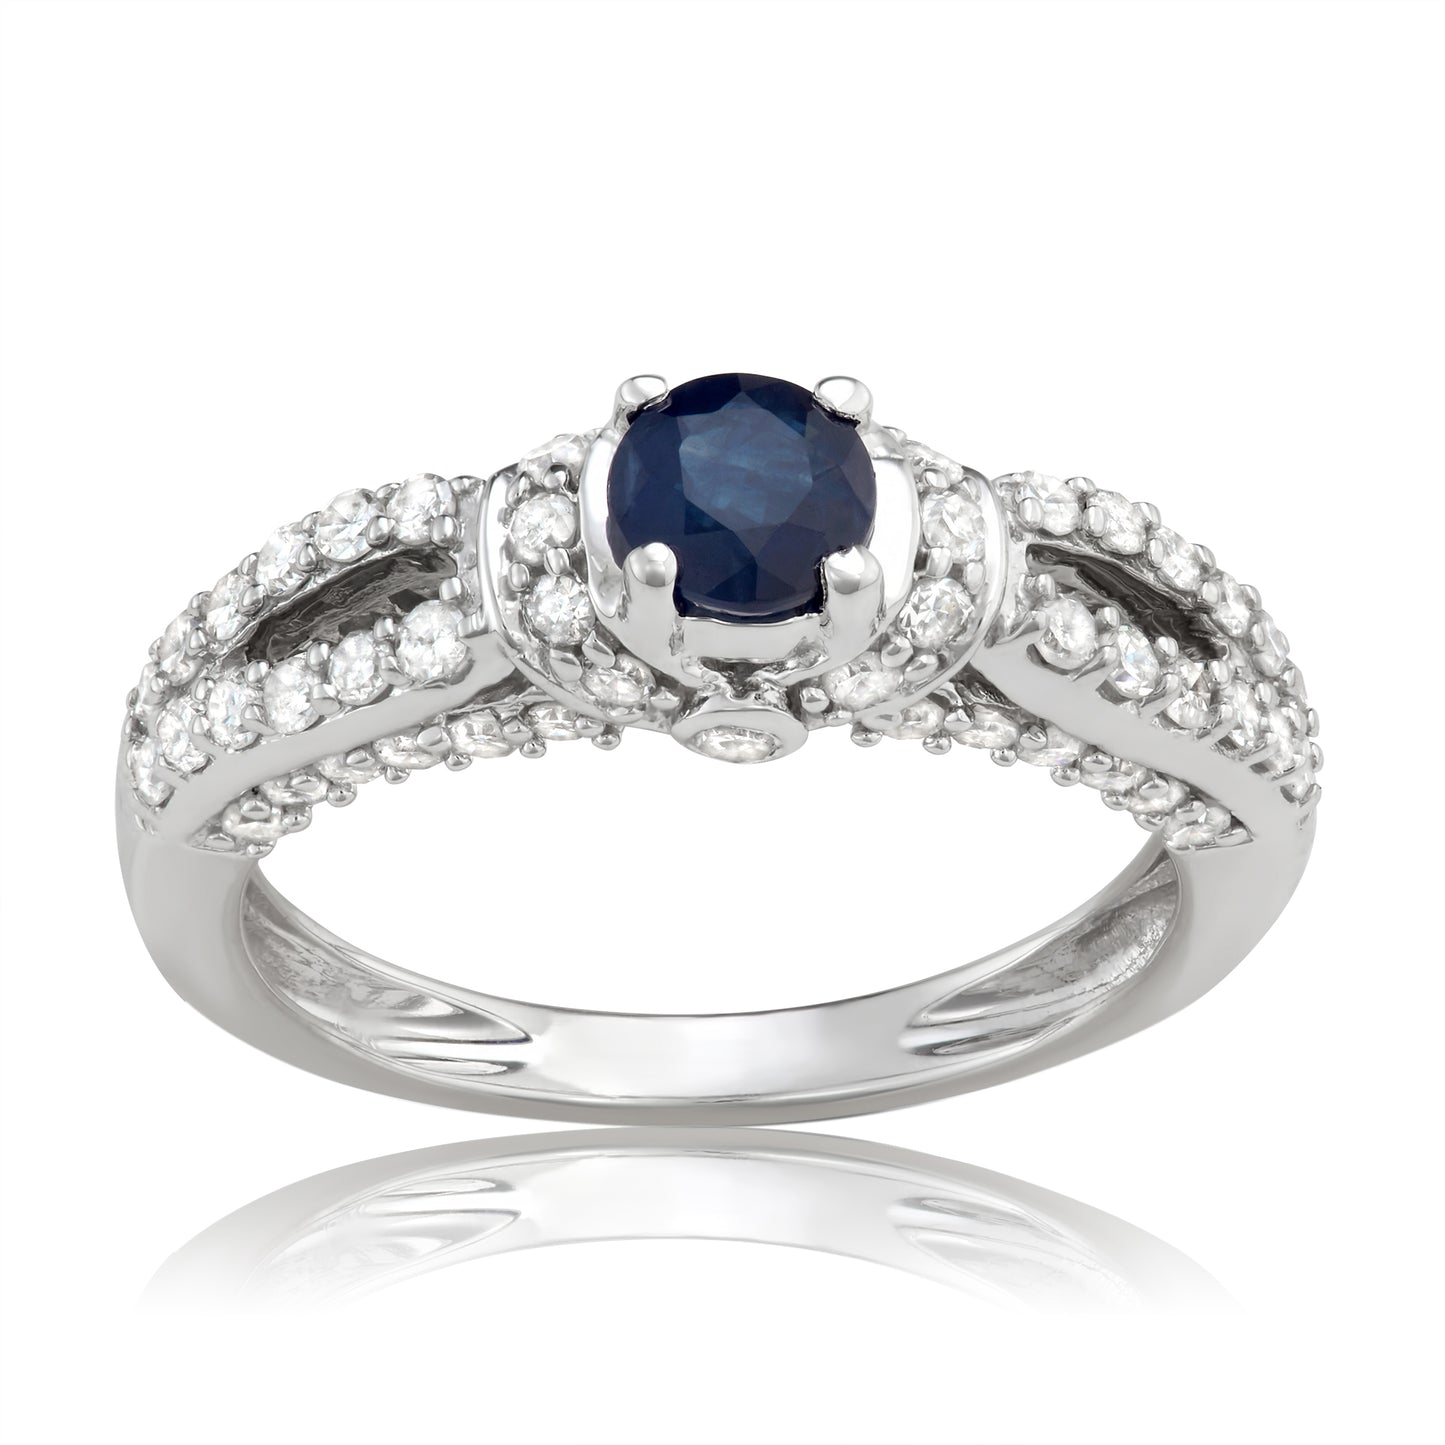 14K White Gold 1.00ct TW Sapphire and White Diamond Engagement Ring